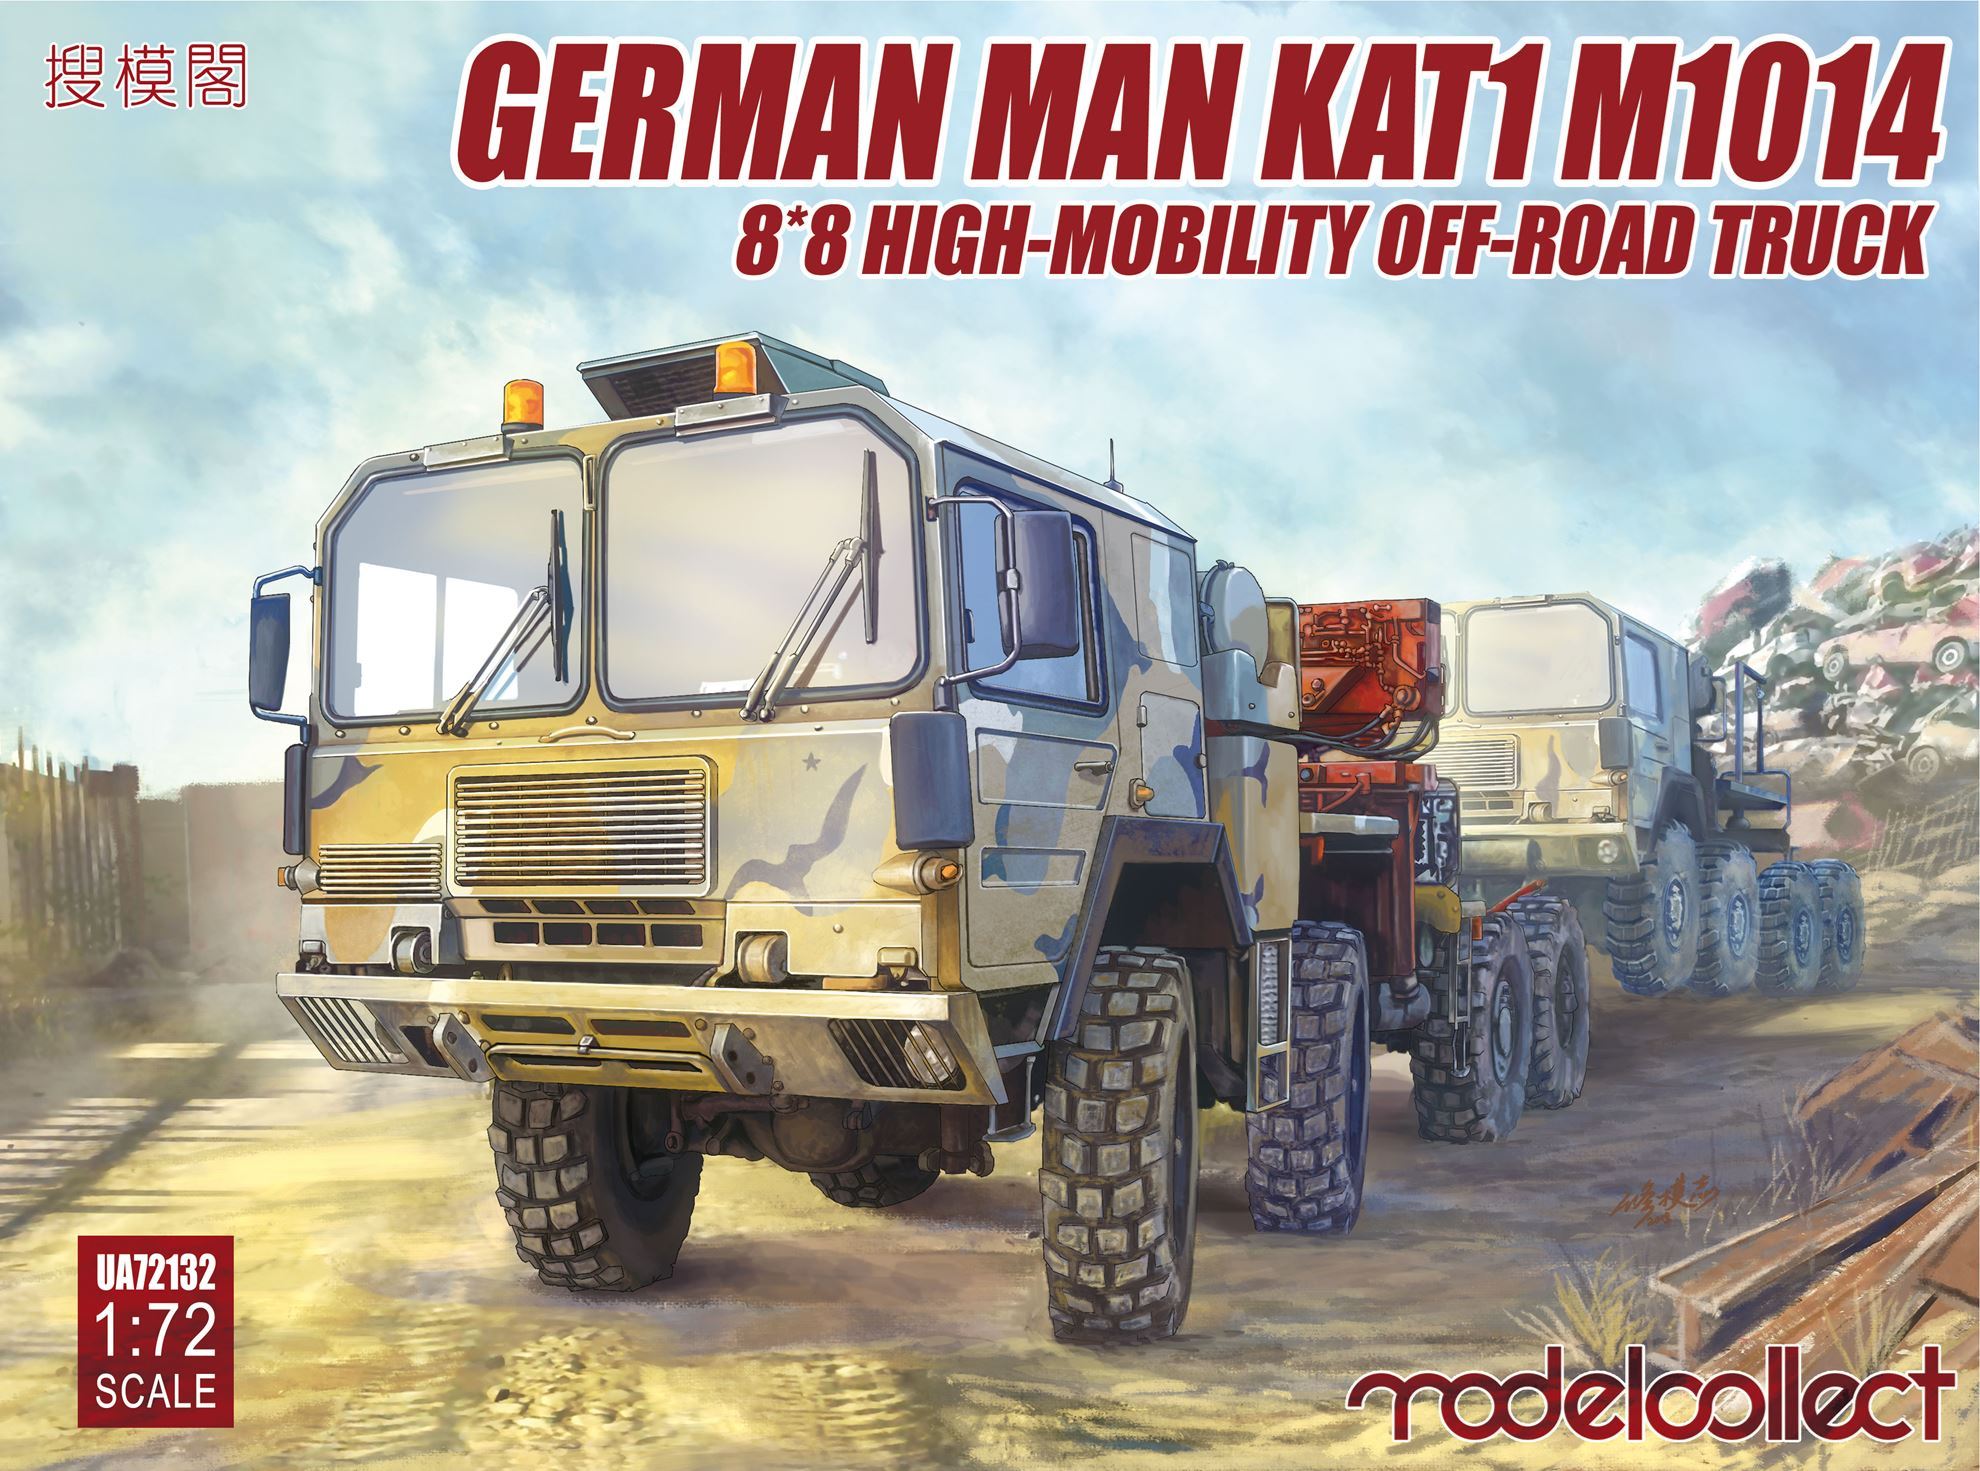 modelcollect-UA72132-1-M1014-MAN-KAT-1-8x8-GL-high-mobility-off-road-truck